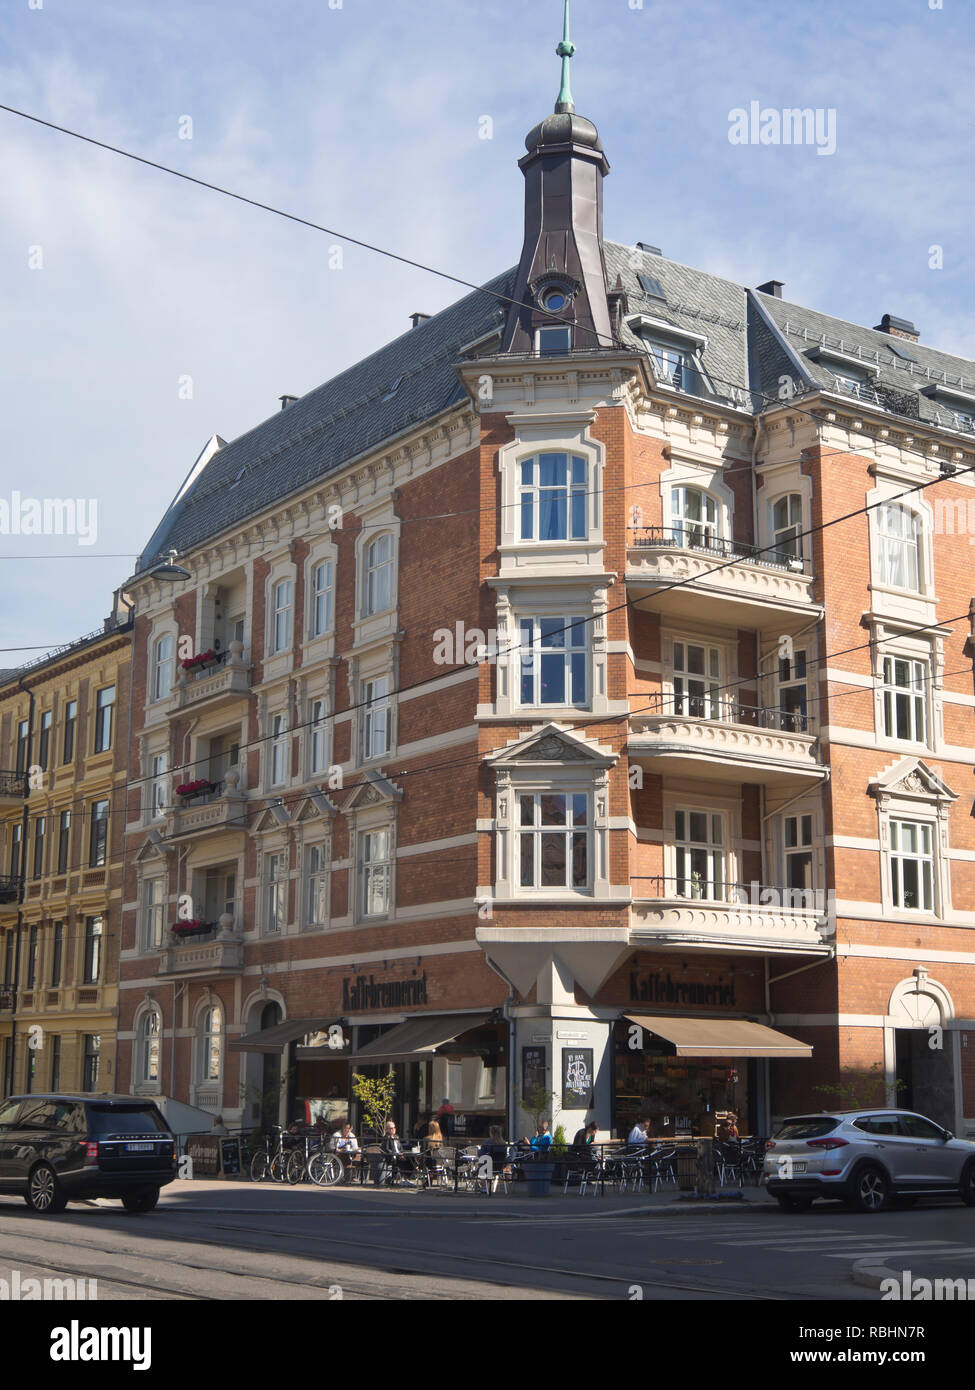 Apartment block with Kaffebrenneriet cafe in Frognerveien street in the Frogner neighborhood of Oslo Norway Stock Photo